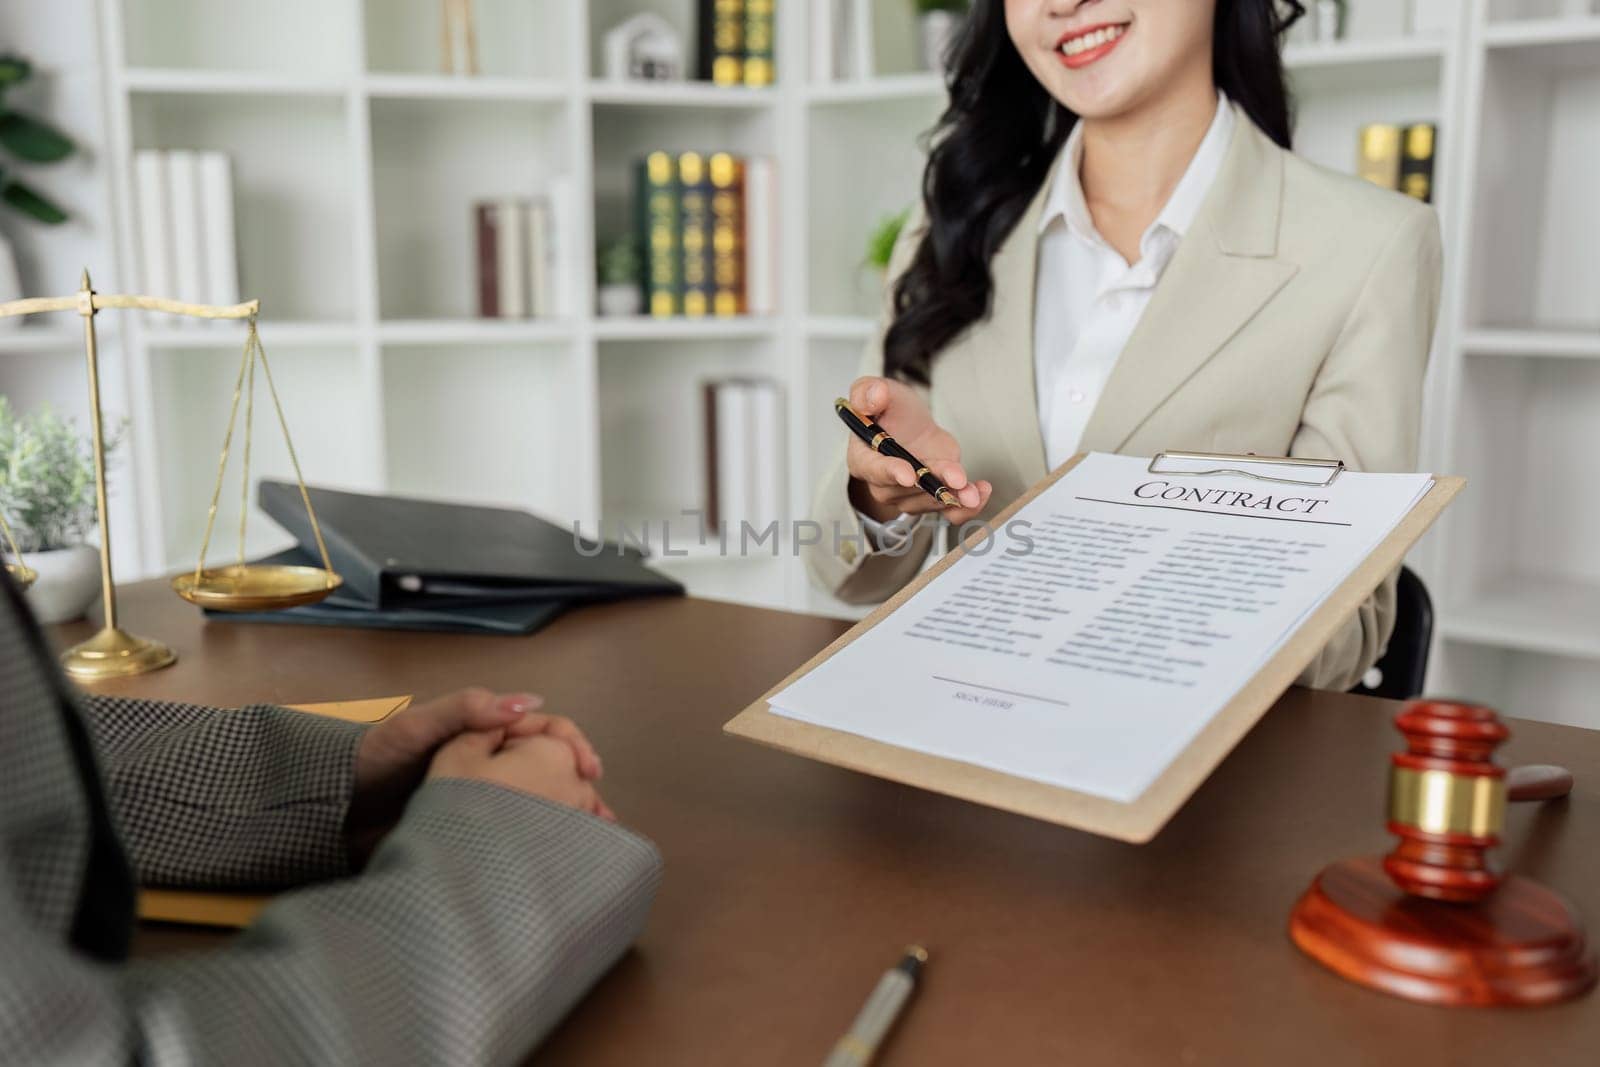 Lawyers provide advice to client are business partner. Lawyer working with client discussing contract document in office, consulting to help customer.